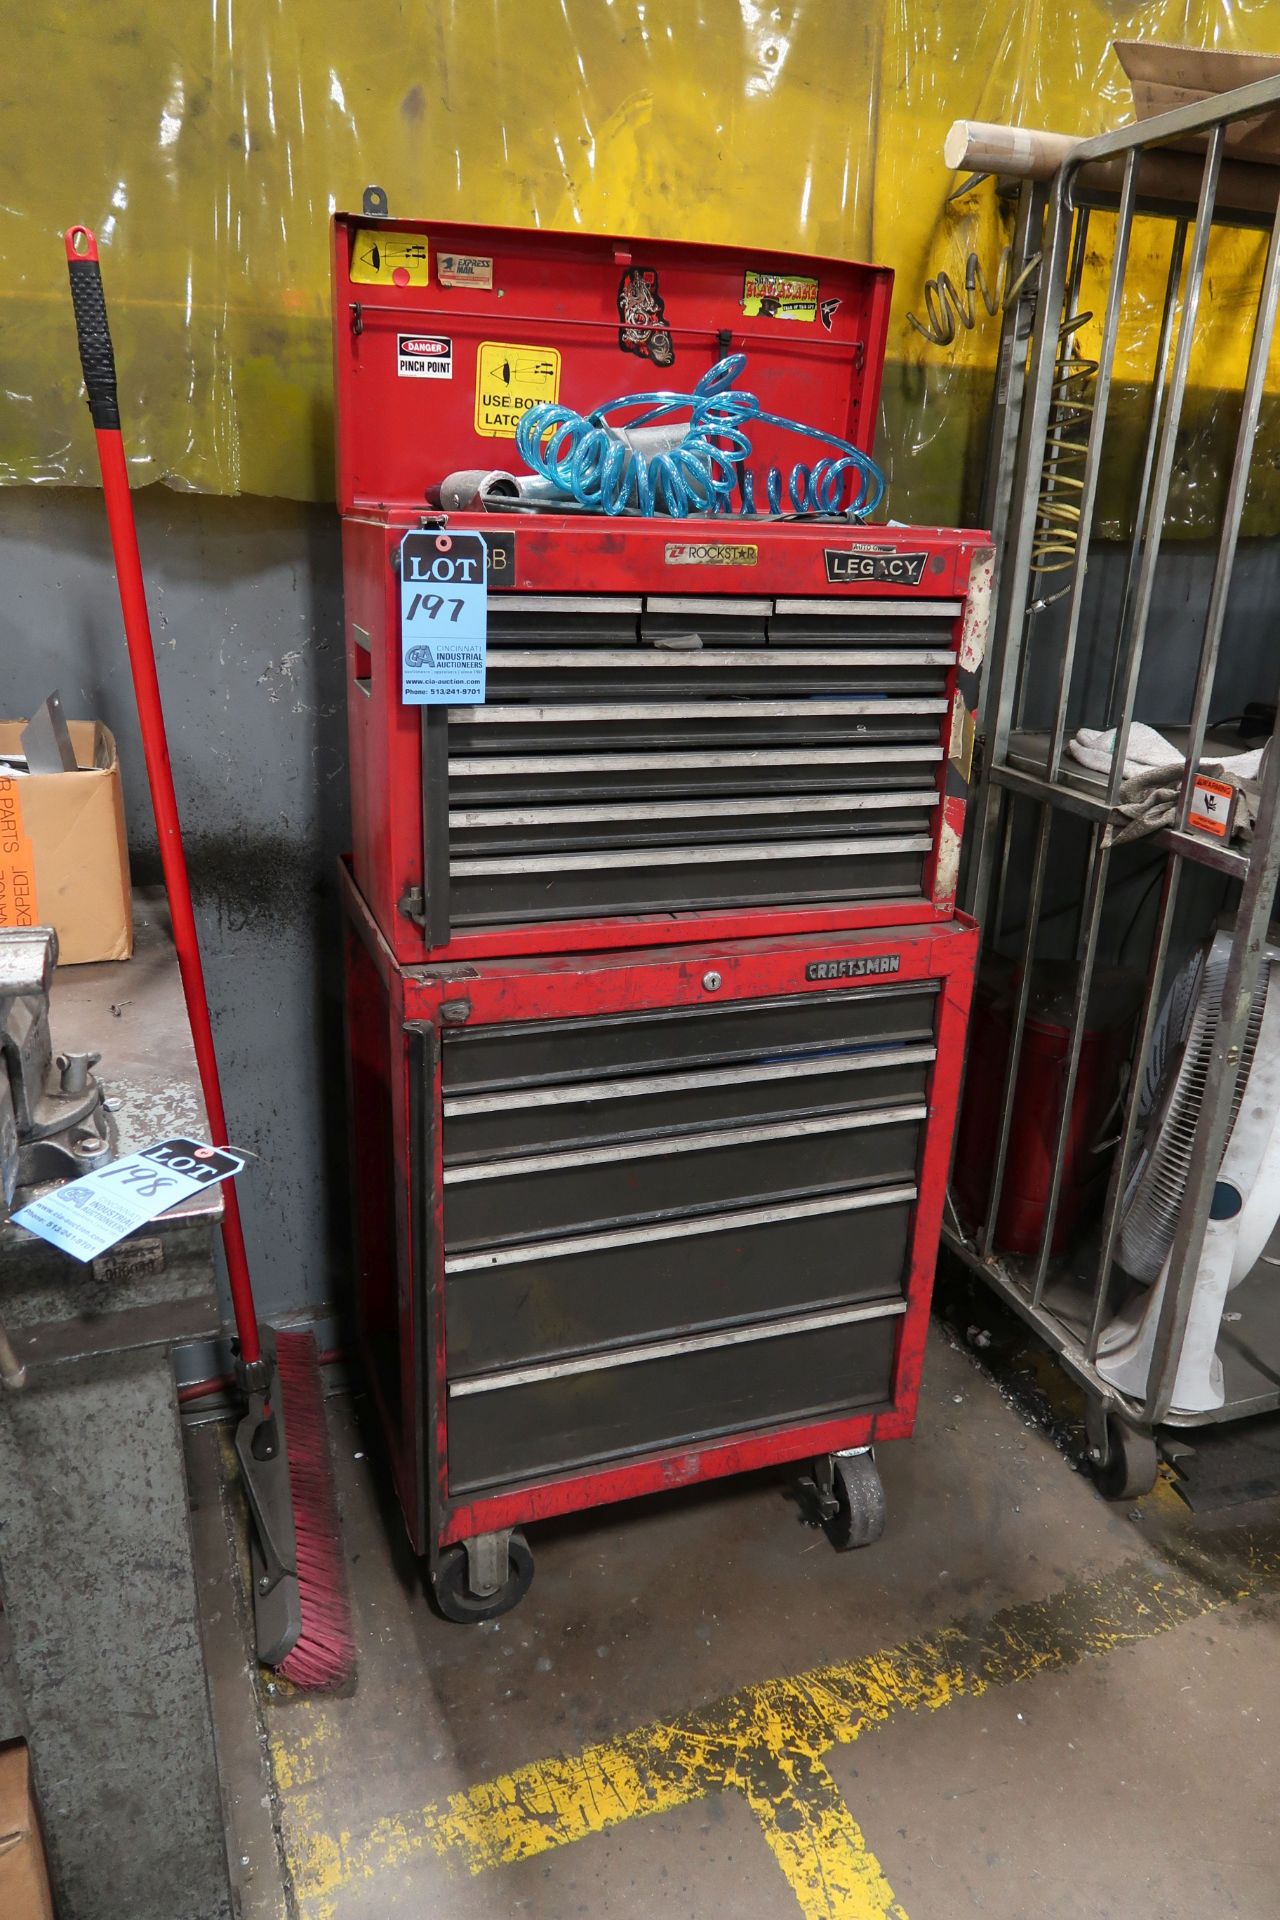 CRAFTSMAN / LEGACY PORTABLE TOOLBOX W/ CONTENTS (PNEUMATIC TOOLS & WRENCHES)